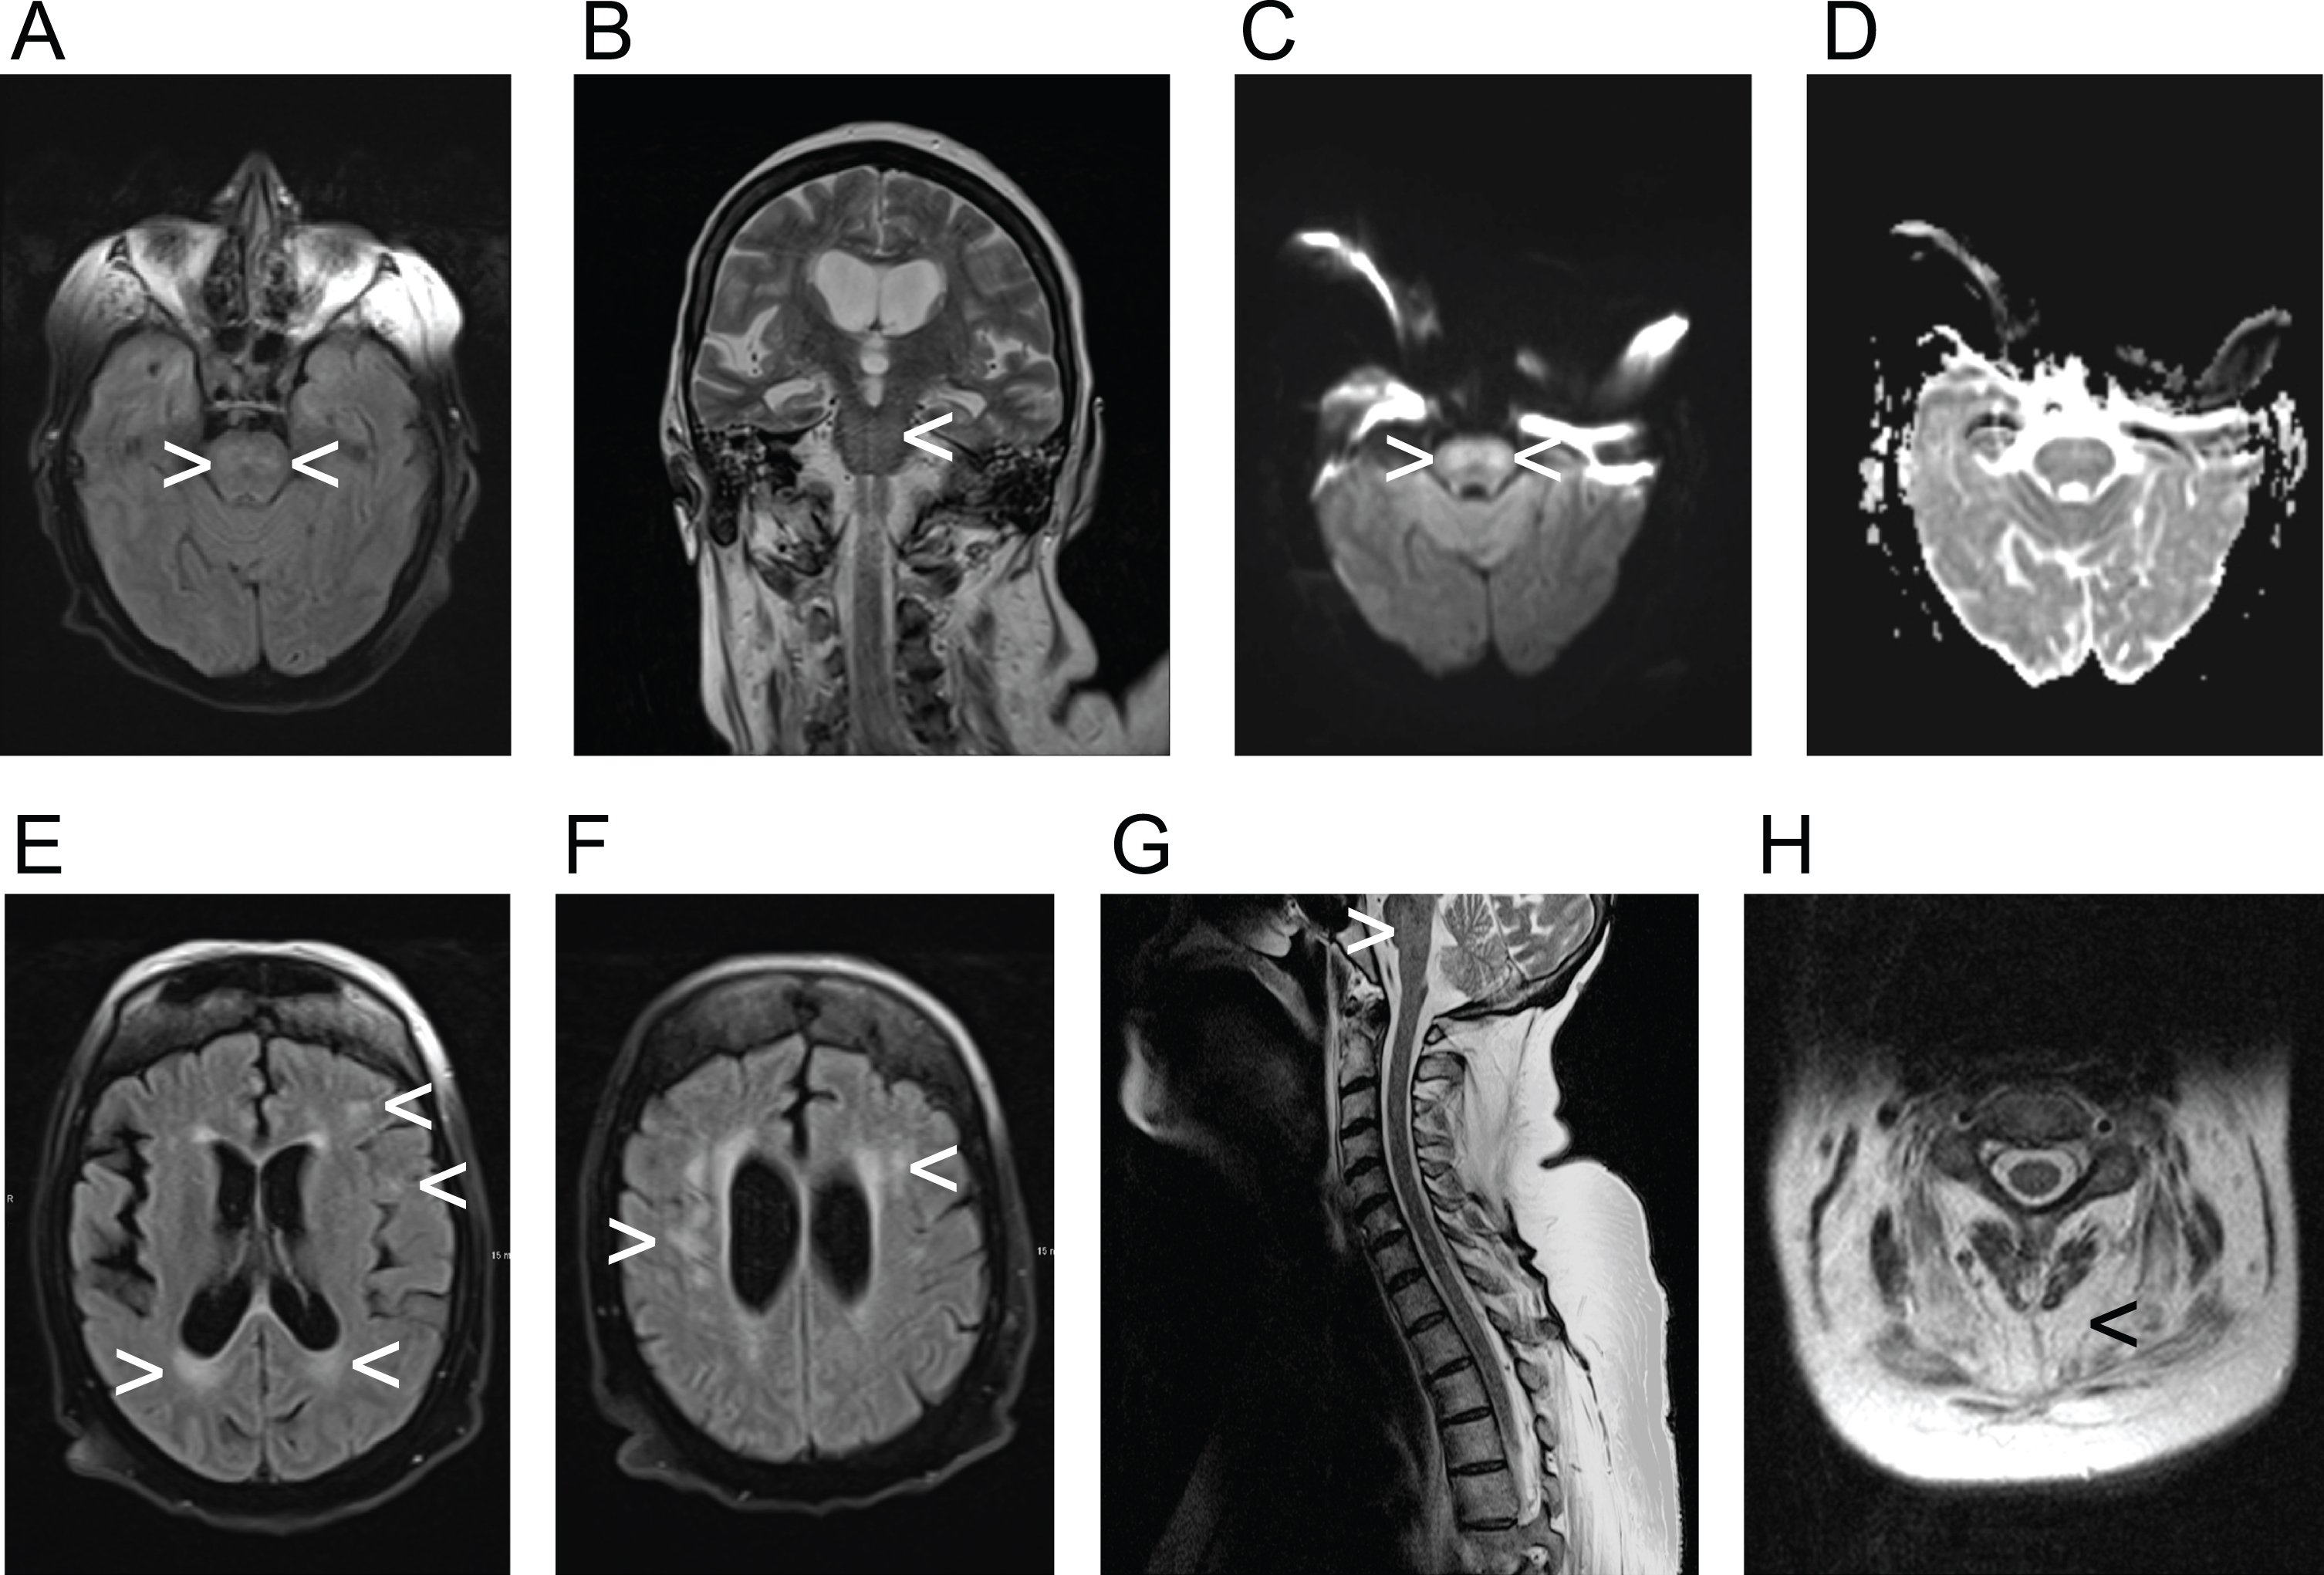 Demonstration of radiological findings in the patient, diagnosed with myotonic dystrophy type 1, utilizing various acquisition techniques. A) fluid-attenuated inversion recovery (FLAIR), axial view; B) coronal T2-weigthed image; C) axial view, diffusion-weighted magnetic resonance imaging (DWI); D) axial view, apparent diffusion coeffizient (ADC); E) and F) fluid-attenuated inversion recovery (FLAIR), axial views; G) T2-weigthed image, saggital view; H) T2-weigthed image, axial view with highlighted sign of muscular atrophy. Arrowheads are implemented to highlight pathologies exemplary. The participant provided an informed consent to publish health data including imaging data.